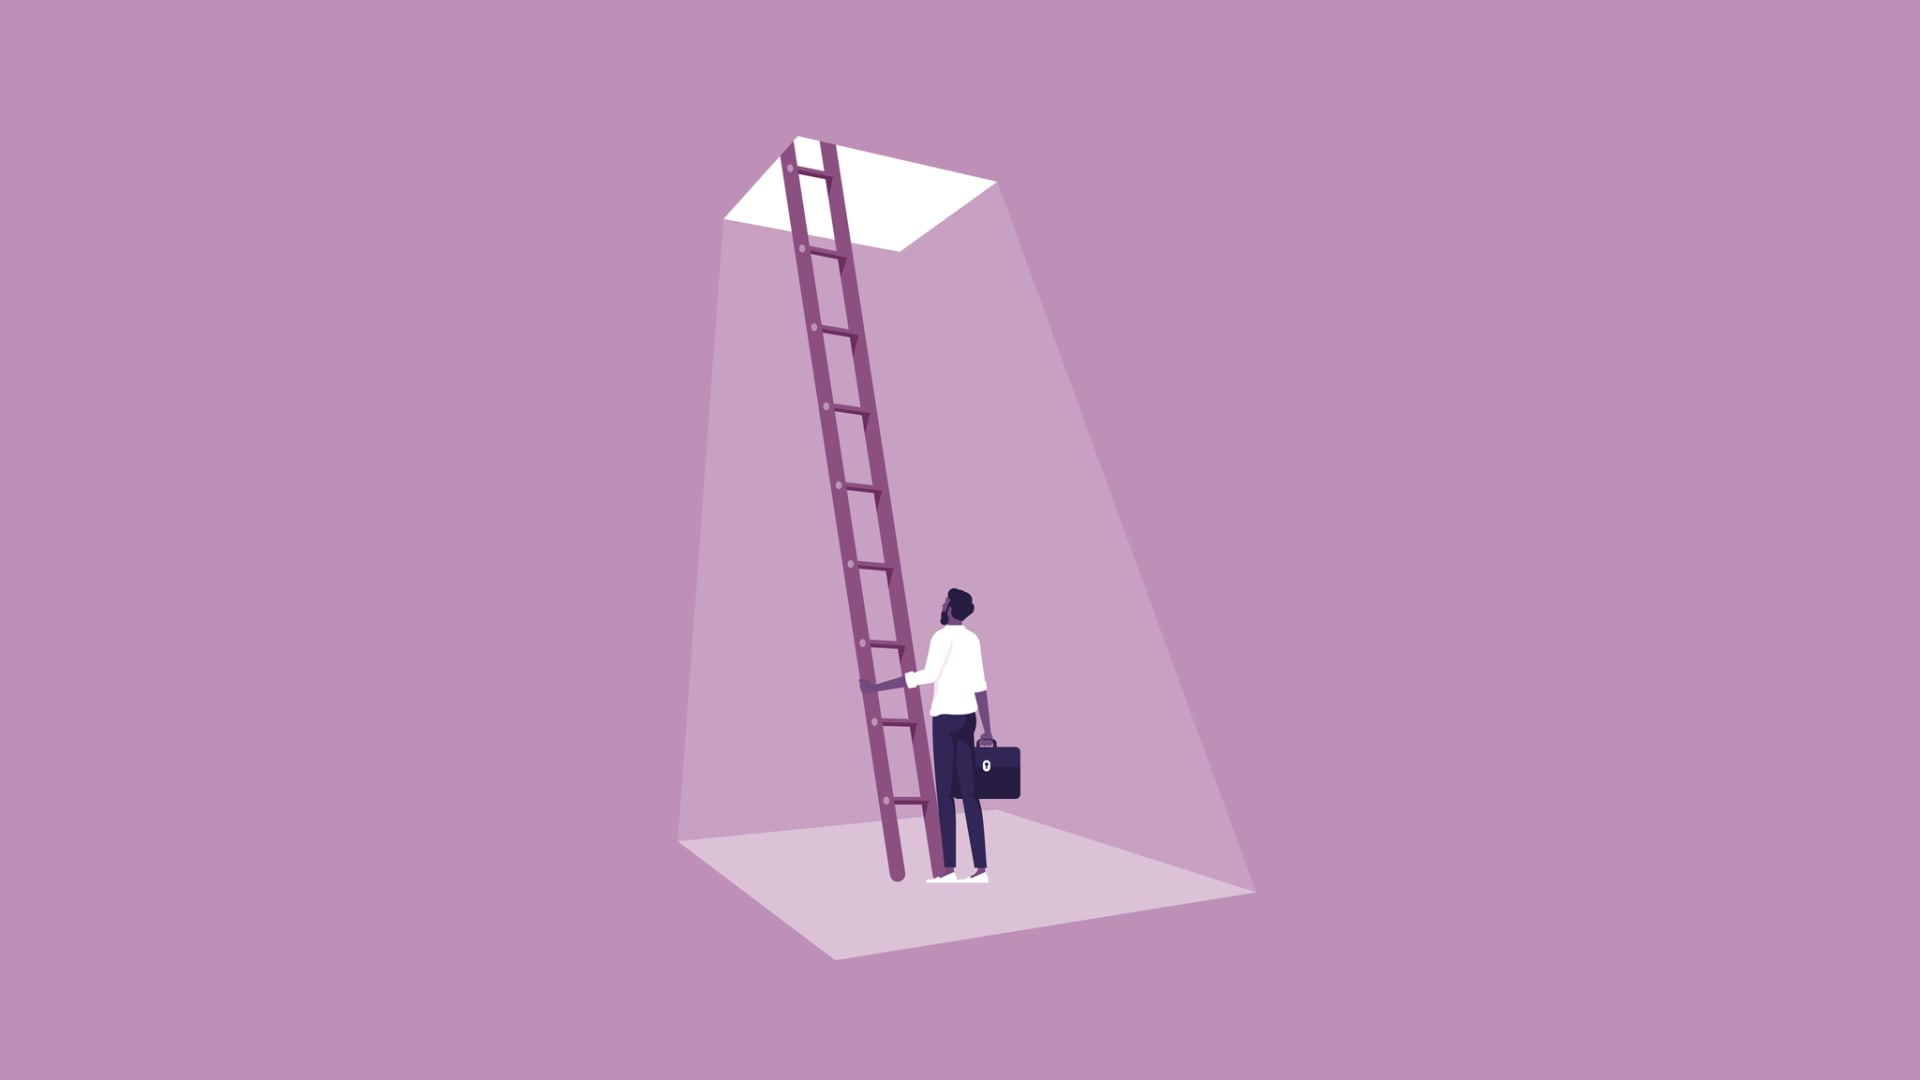 Stressing Out About a Tough Decision? Make it Easy with the 5-Minute 'Ladder Rule'